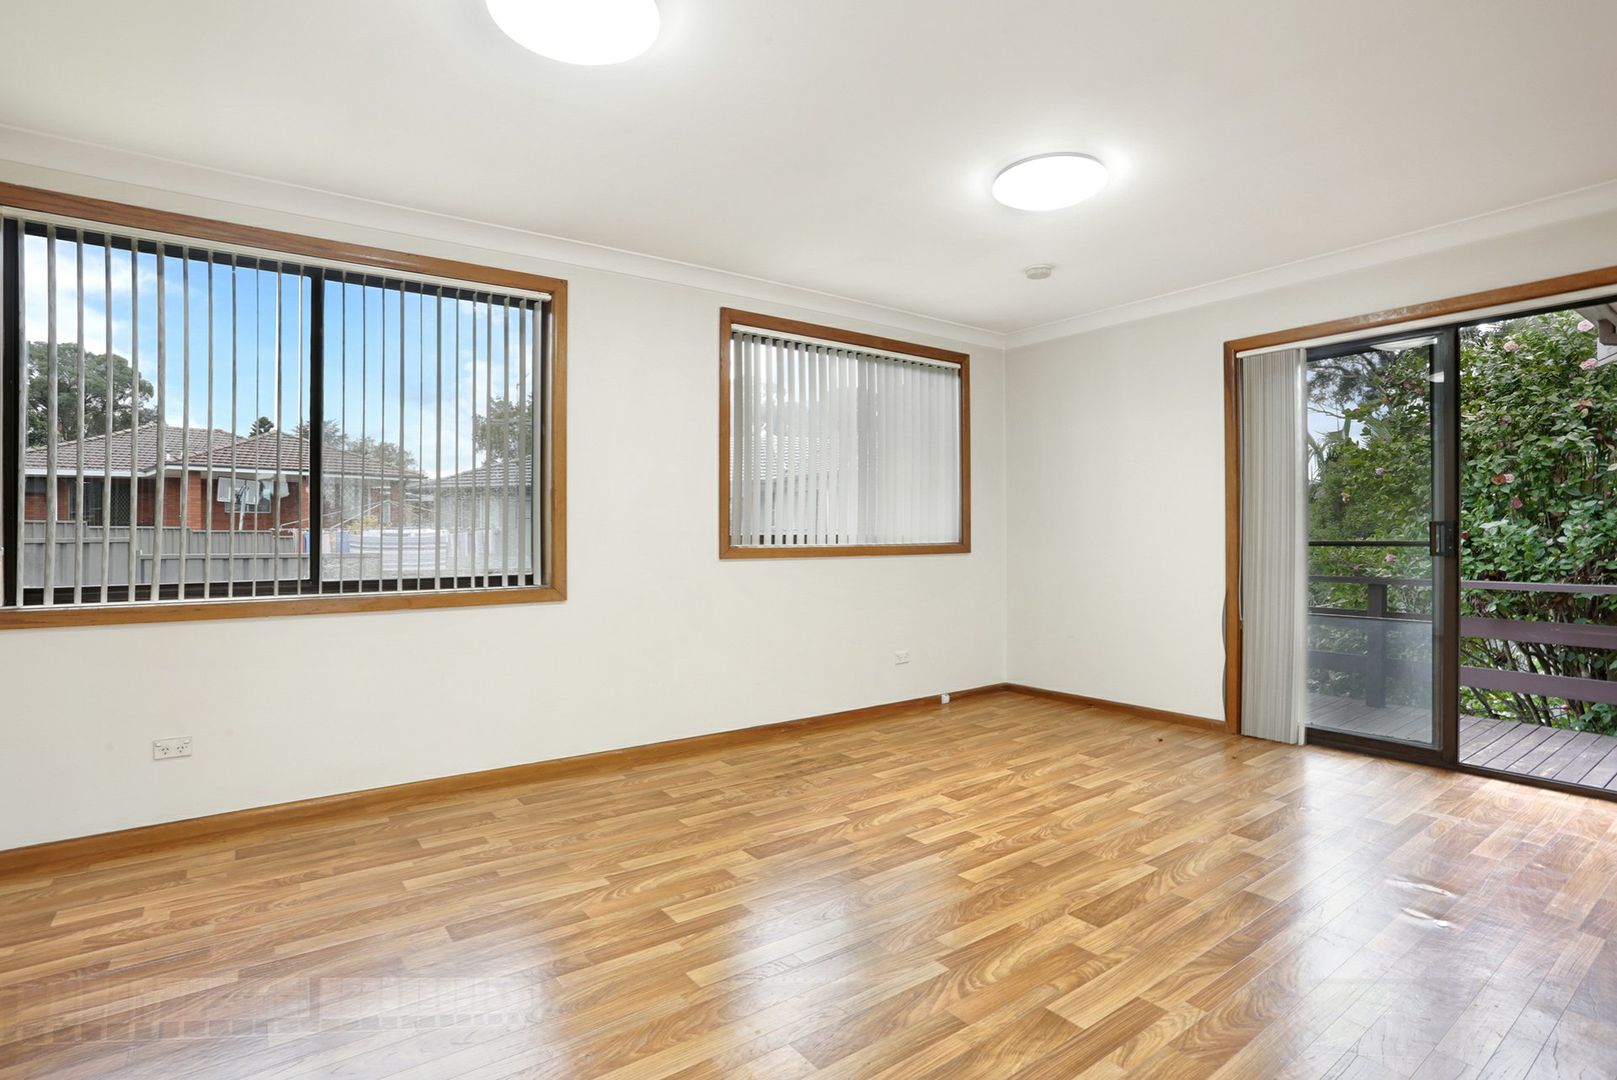 25 Ayres Crescent, Georges Hall NSW 2198, Image 2